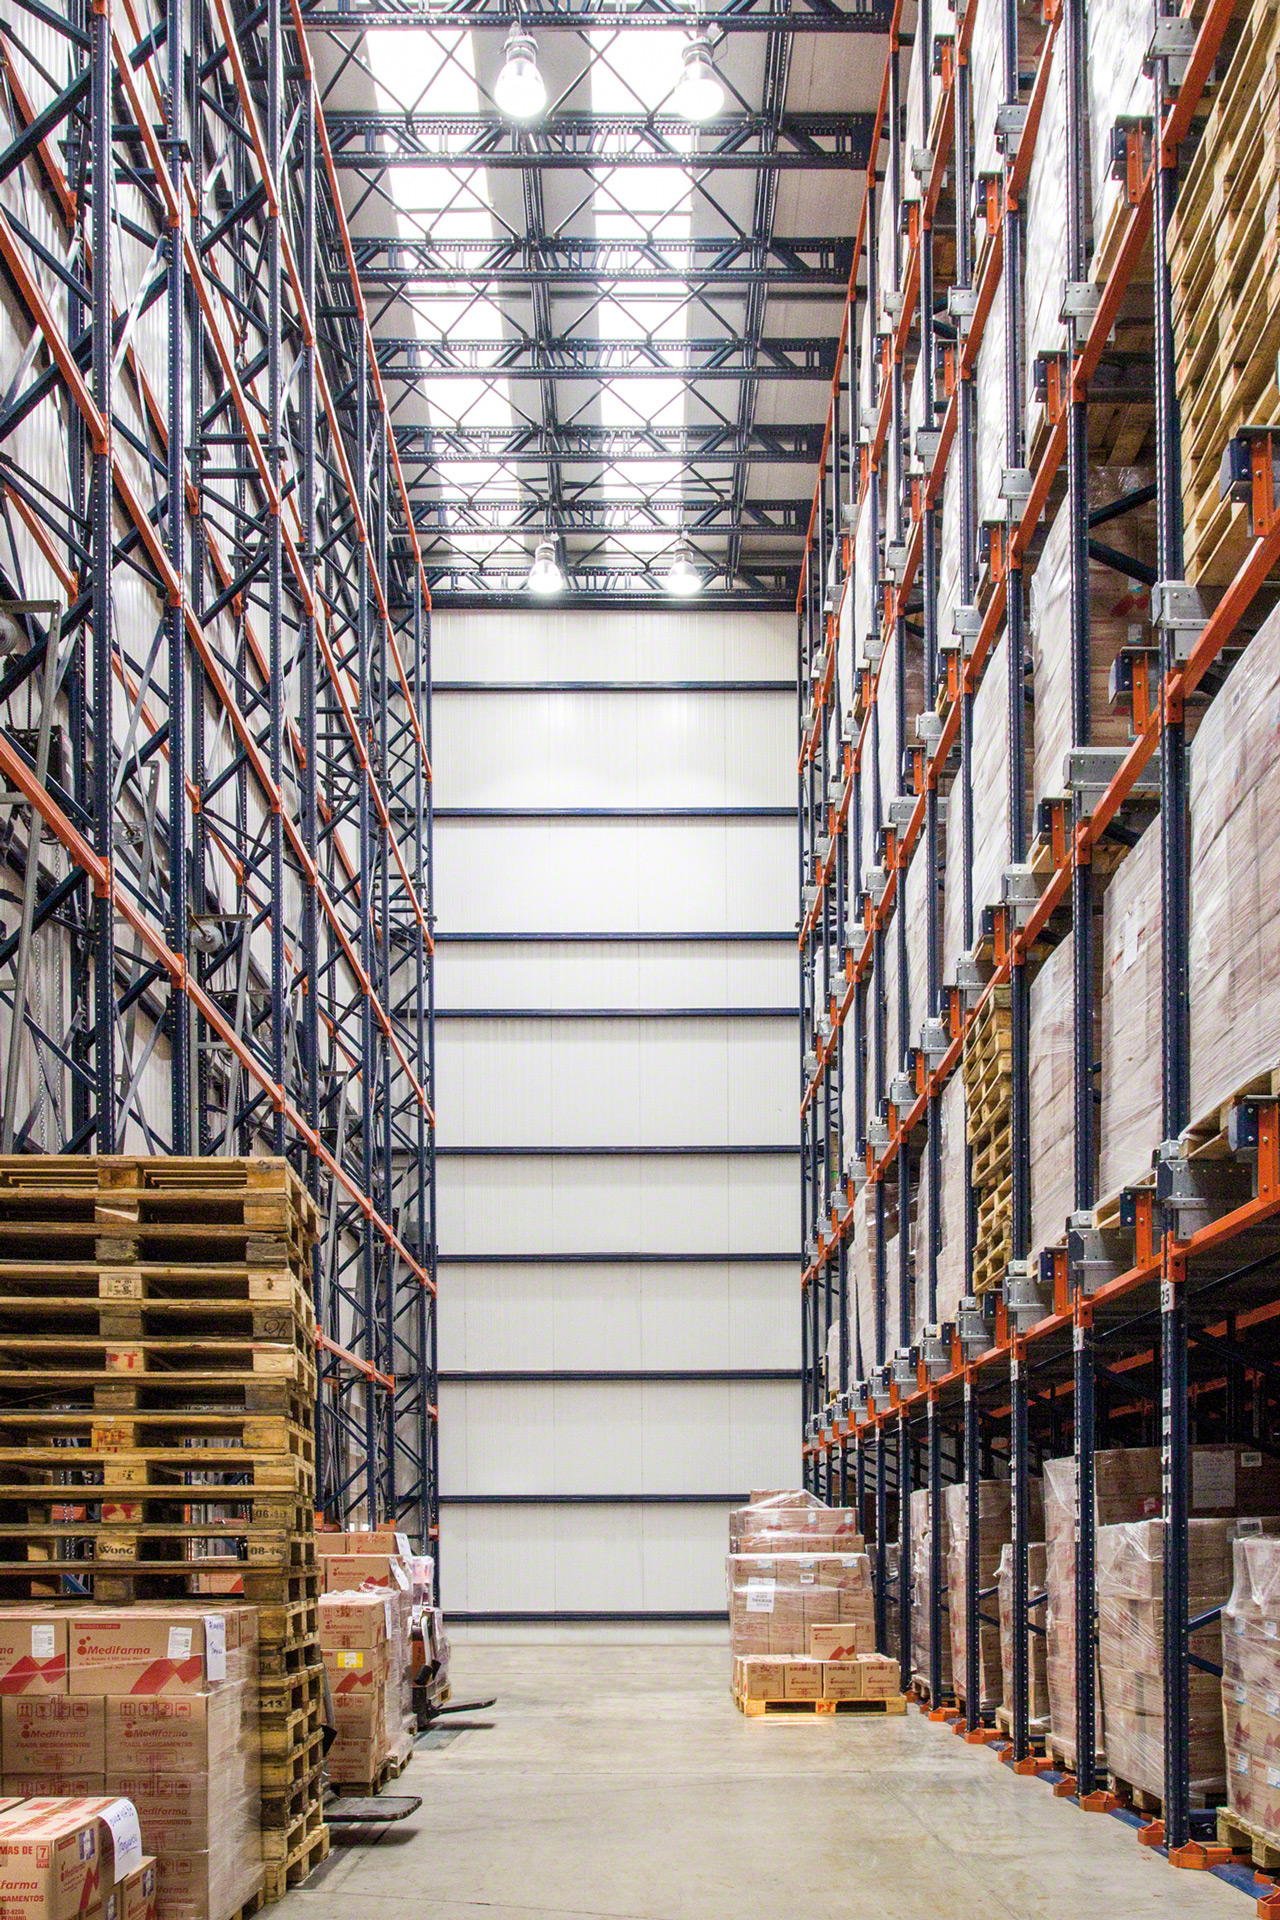 When combined with Rack Supported Buildings, the Pallet Shuttle can take full advantage of the warehouse space